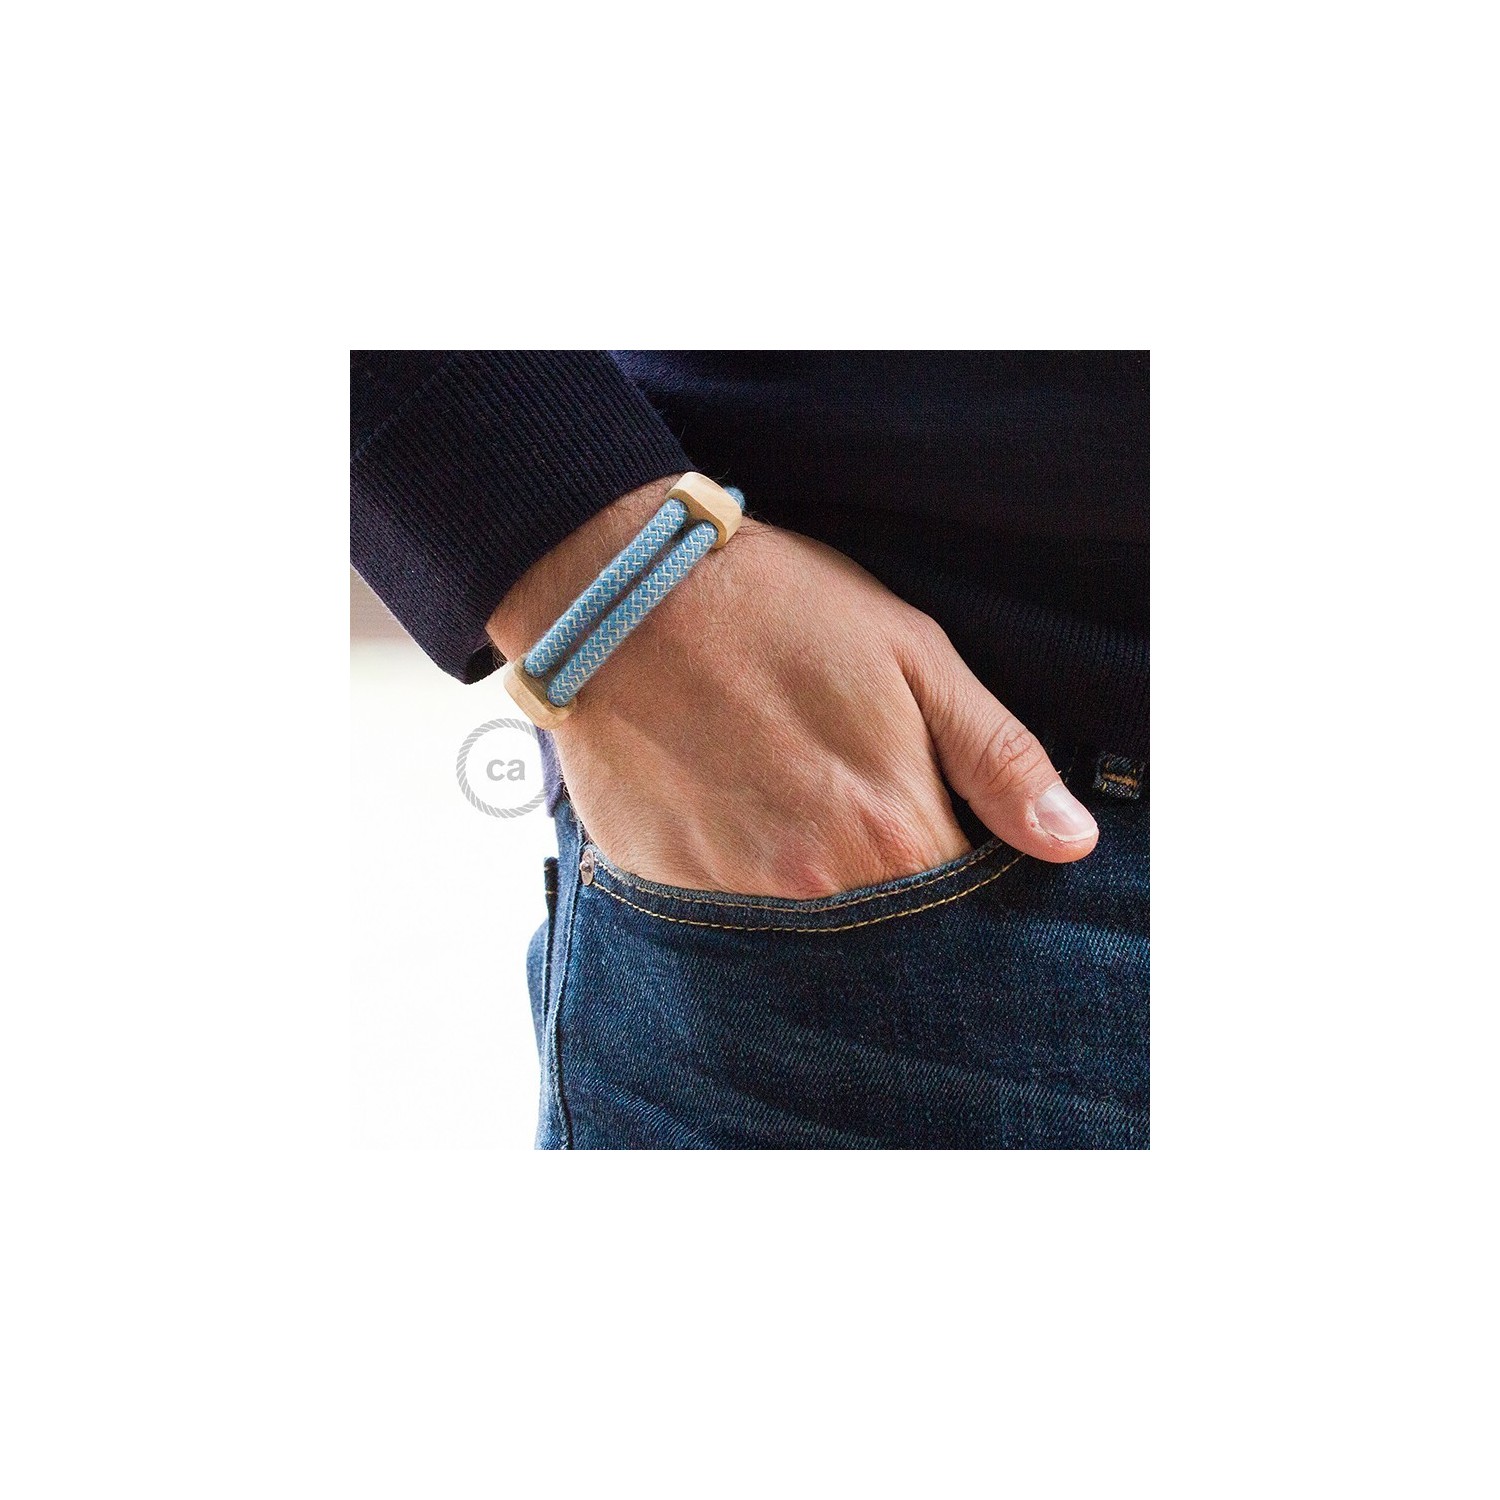 Creative-Bracelet in Cotton and Natural Linen Steward Bluee RD75. Wood sliding fastening. Made in Italy.